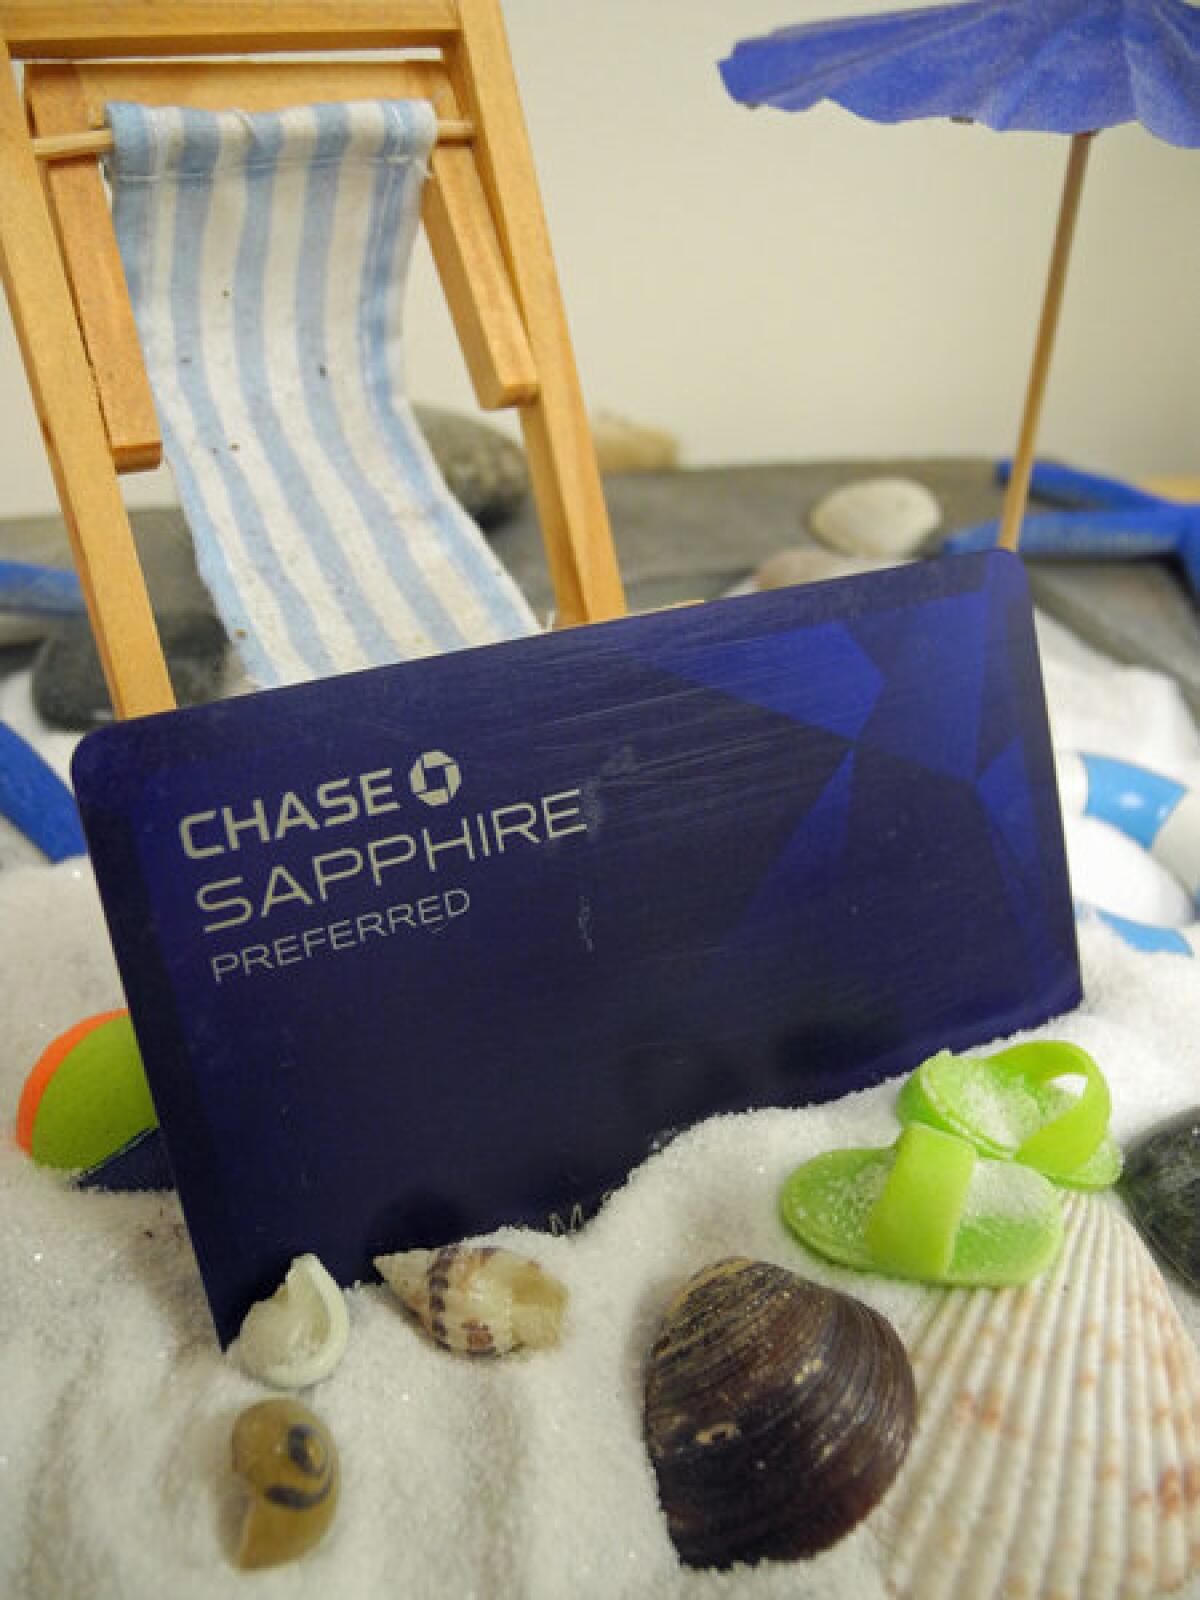 Later this month, the Chase Sapphire Preferred credit card will come with an embedded chip. Foreign transactions sometimes require the chip card.